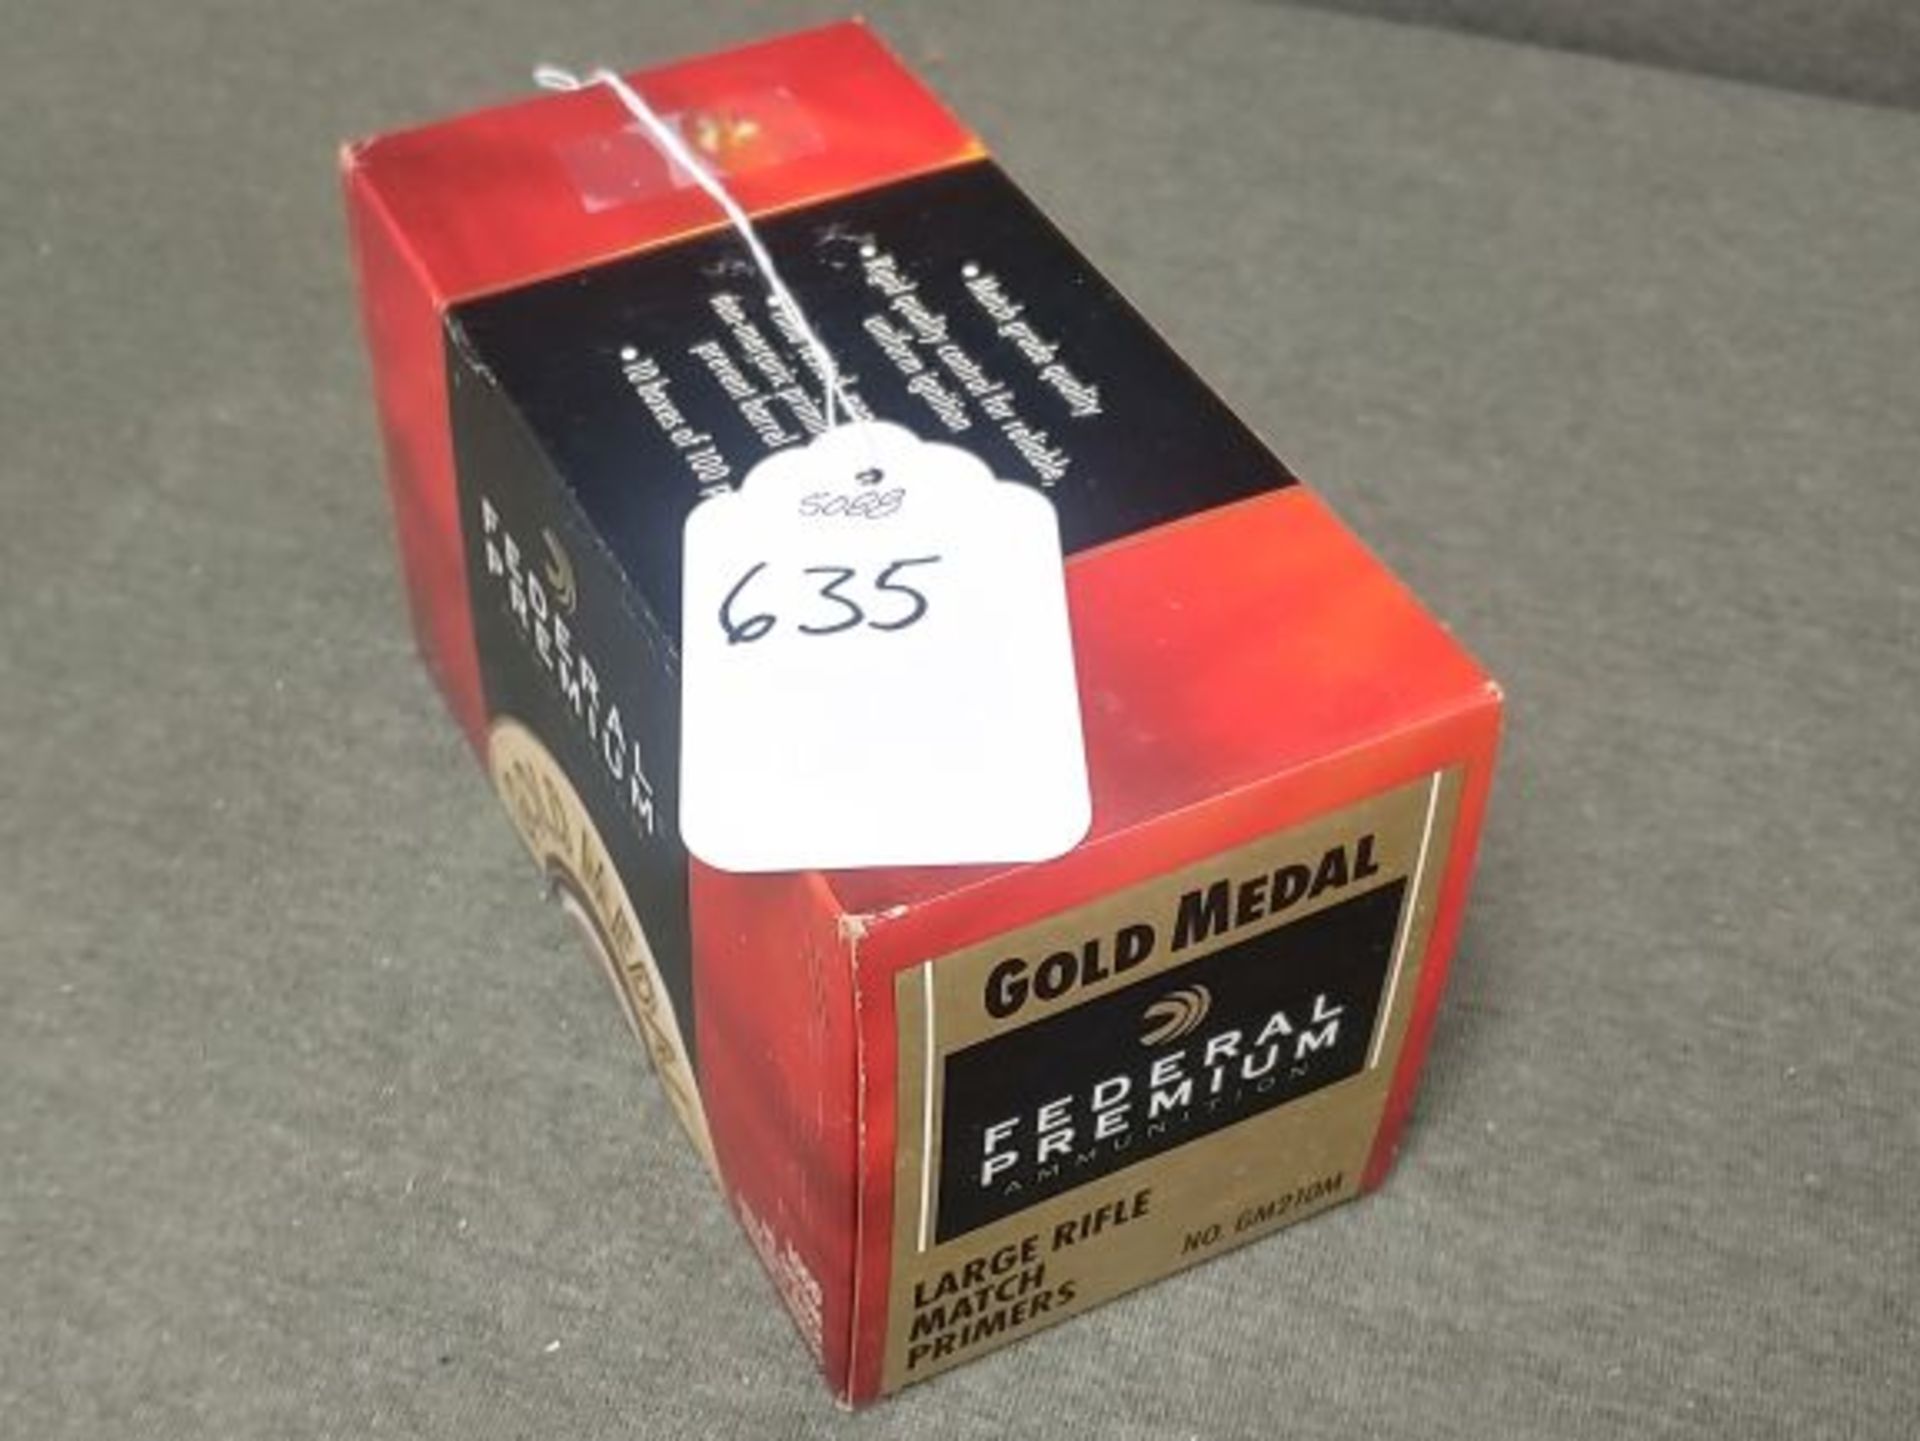 635. Fed Premium Large Rifle Match Primers, Box of 1000 (1x the Money)